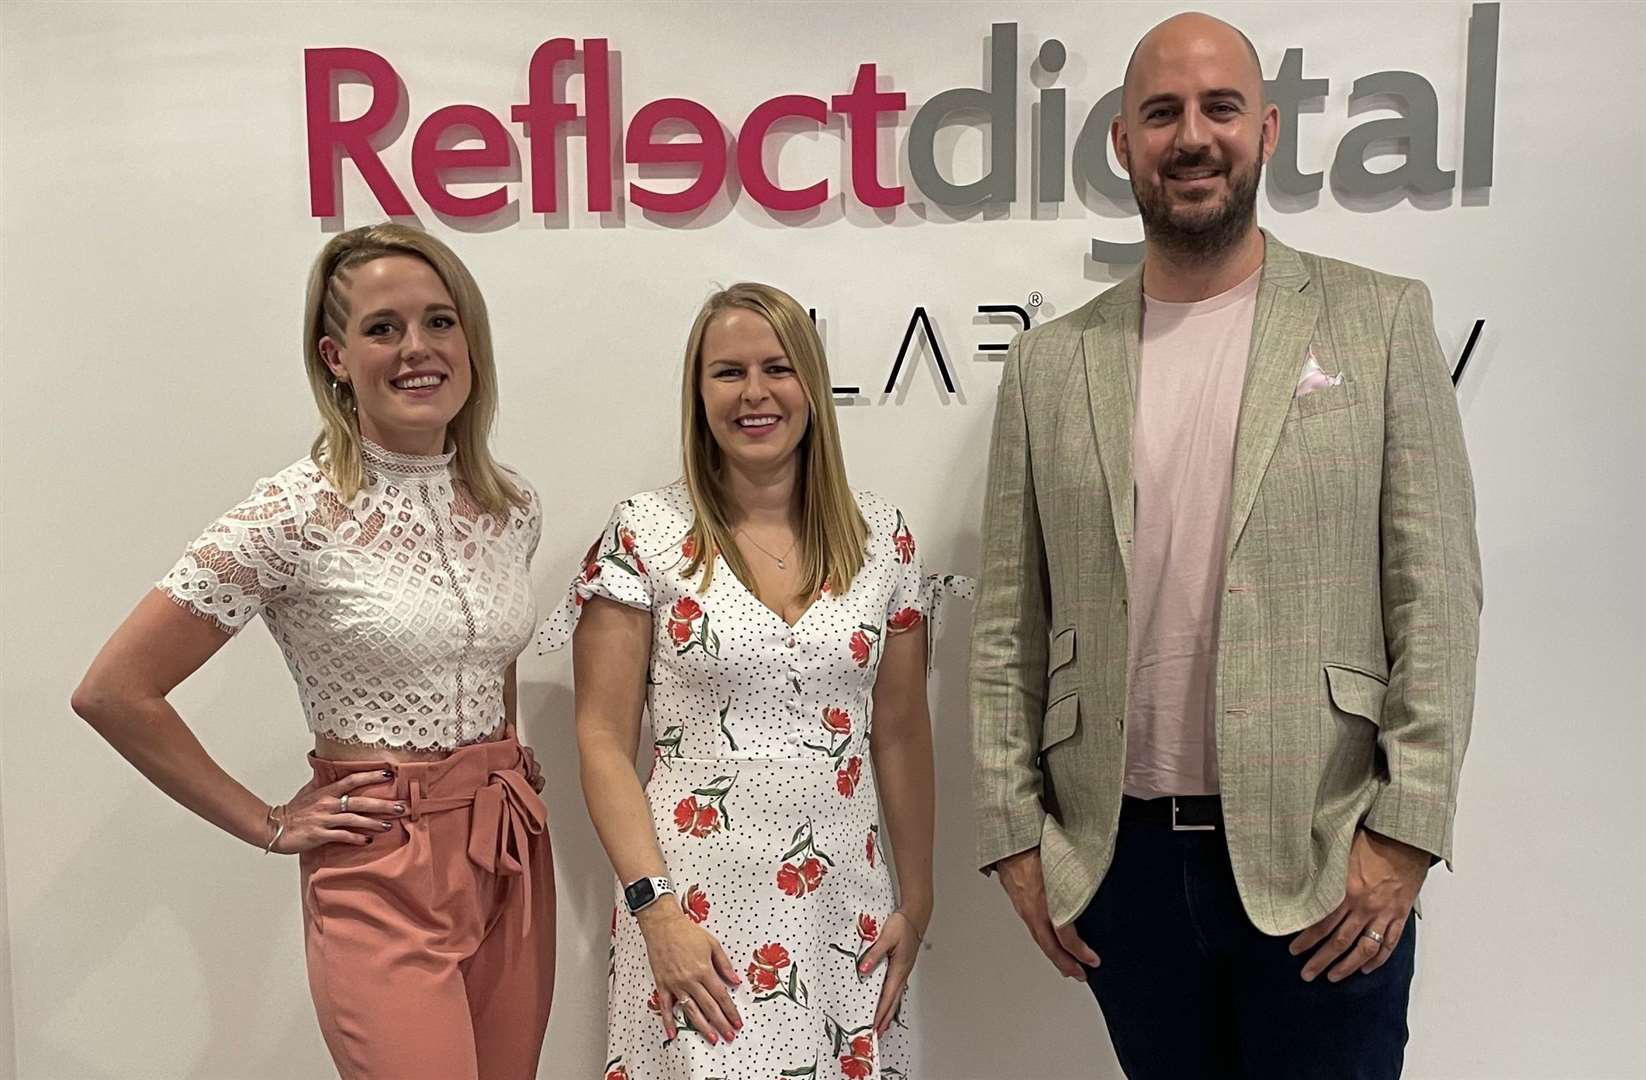 AM Marketing's Amy Hopper (left) with Becky Simms and Paul Simms from Reflect Digital